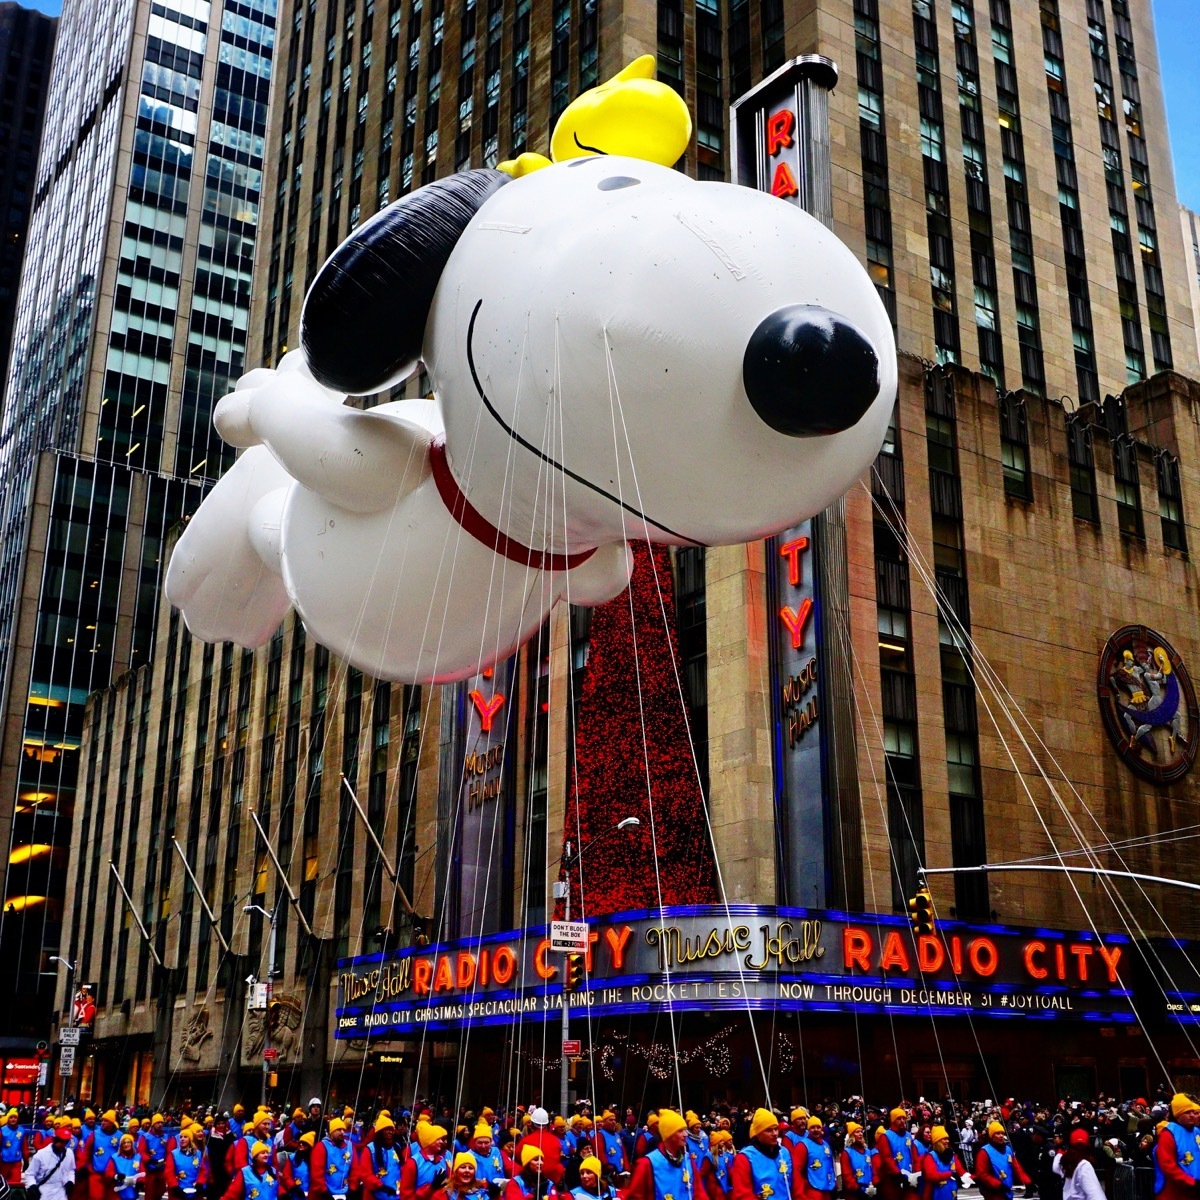 Snoopy float at the Macy's Thanksgiving Day Parade